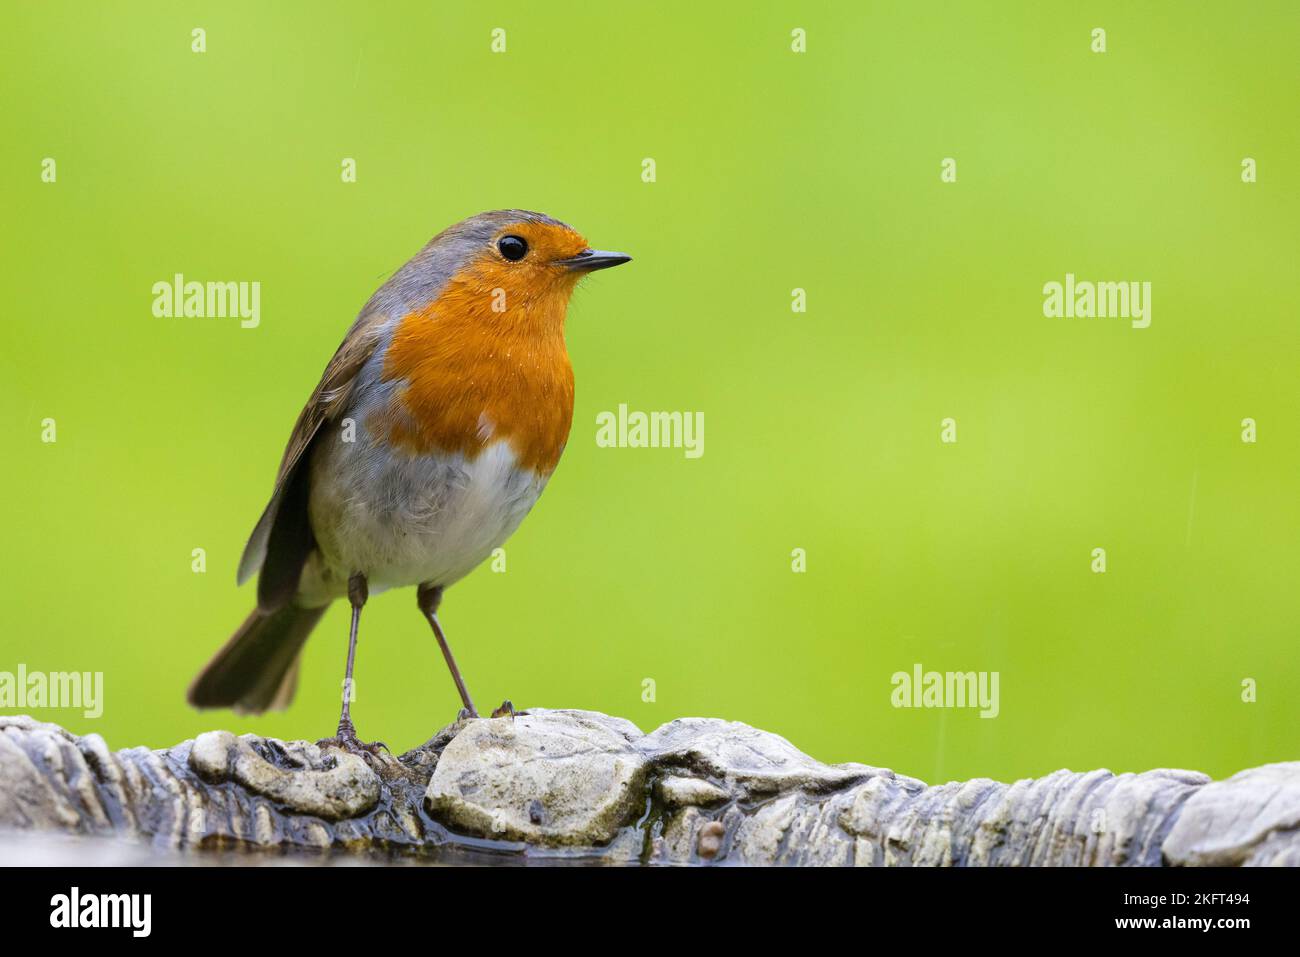 European Robin [ Erithacus rubecula ] perched on garden bird bath with clean out of focus green background Stock Photo